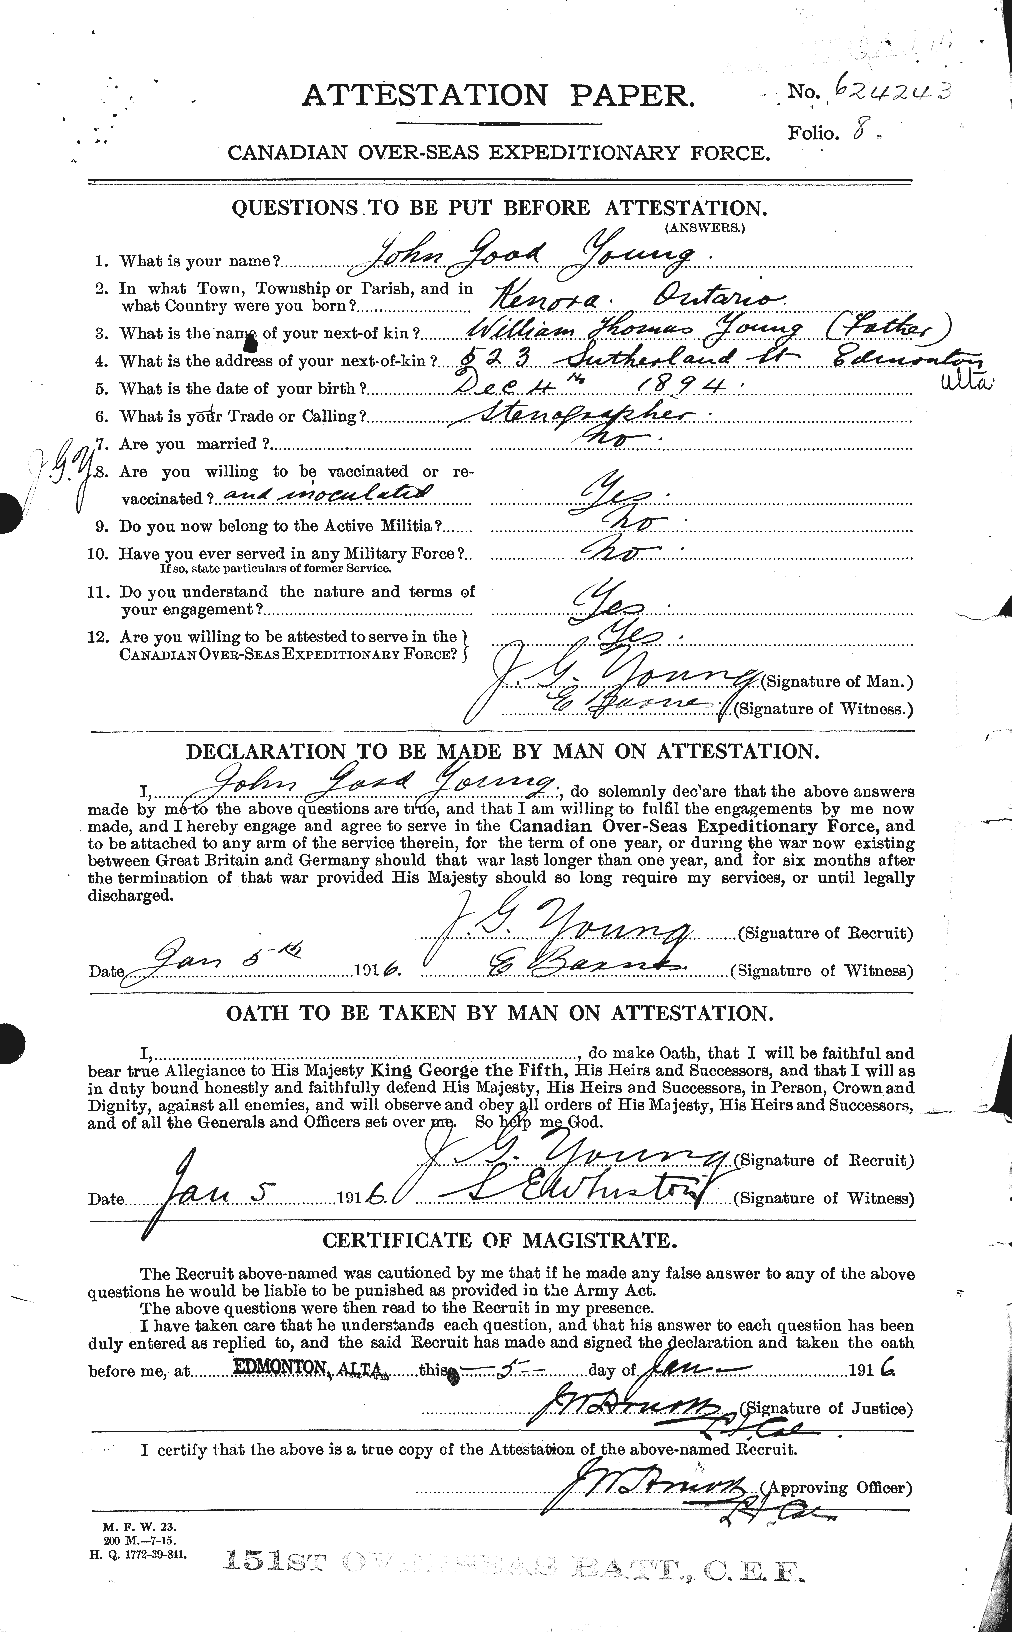 Personnel Records of the First World War - CEF 690761a